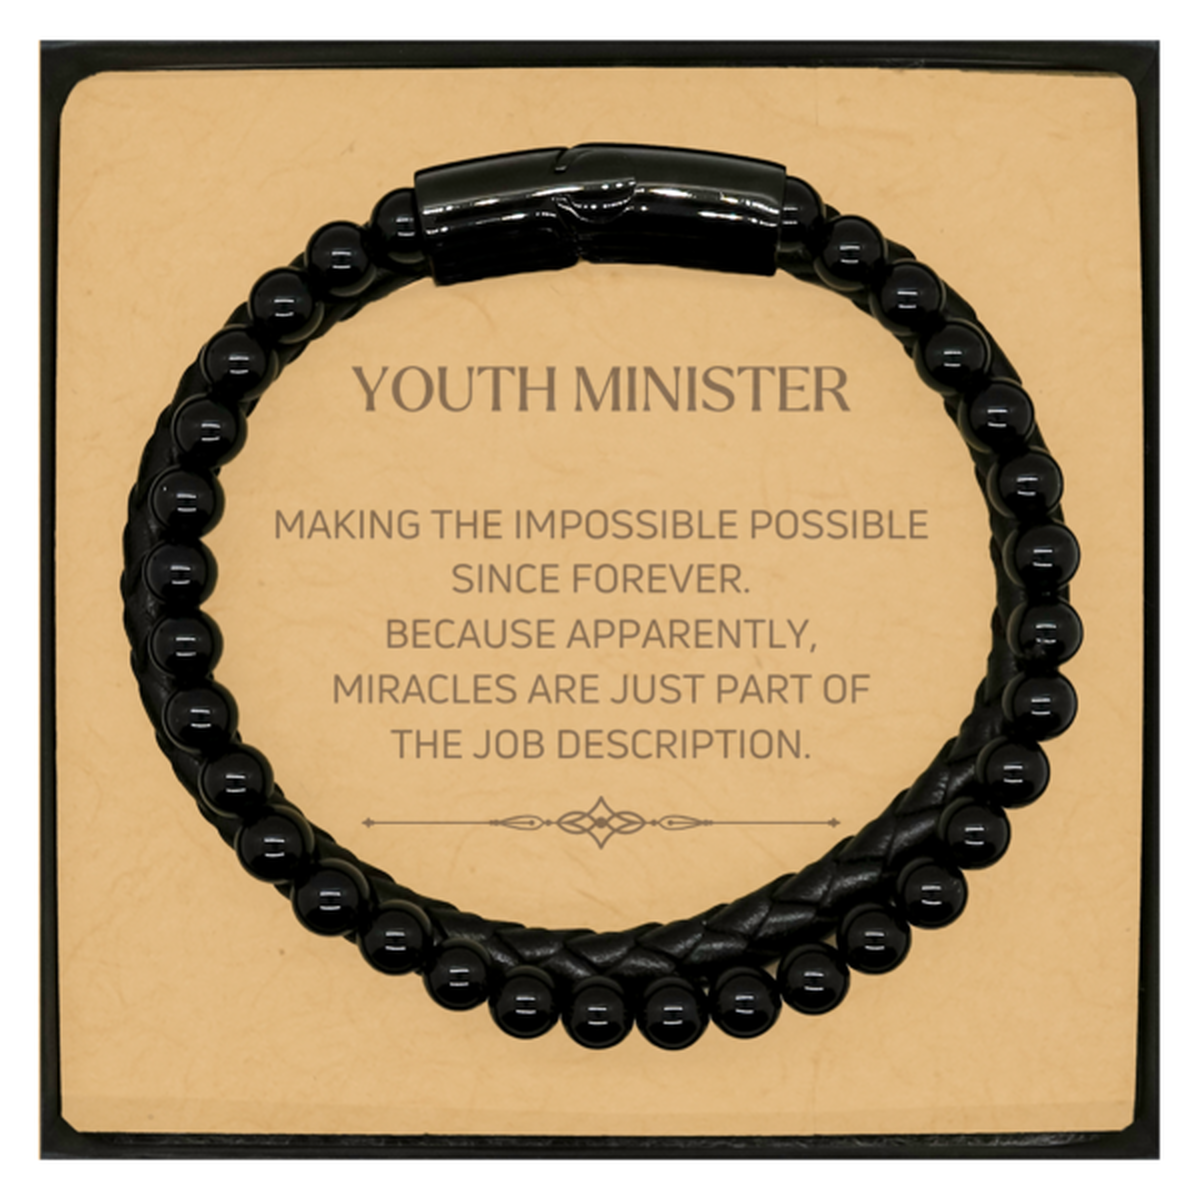 Funny Youth Minister Gifts, Miracles are just part of the job description, Inspirational Birthday Christmas Stone Leather Bracelets For Youth Minister, Men, Women, Coworkers, Friends, Boss